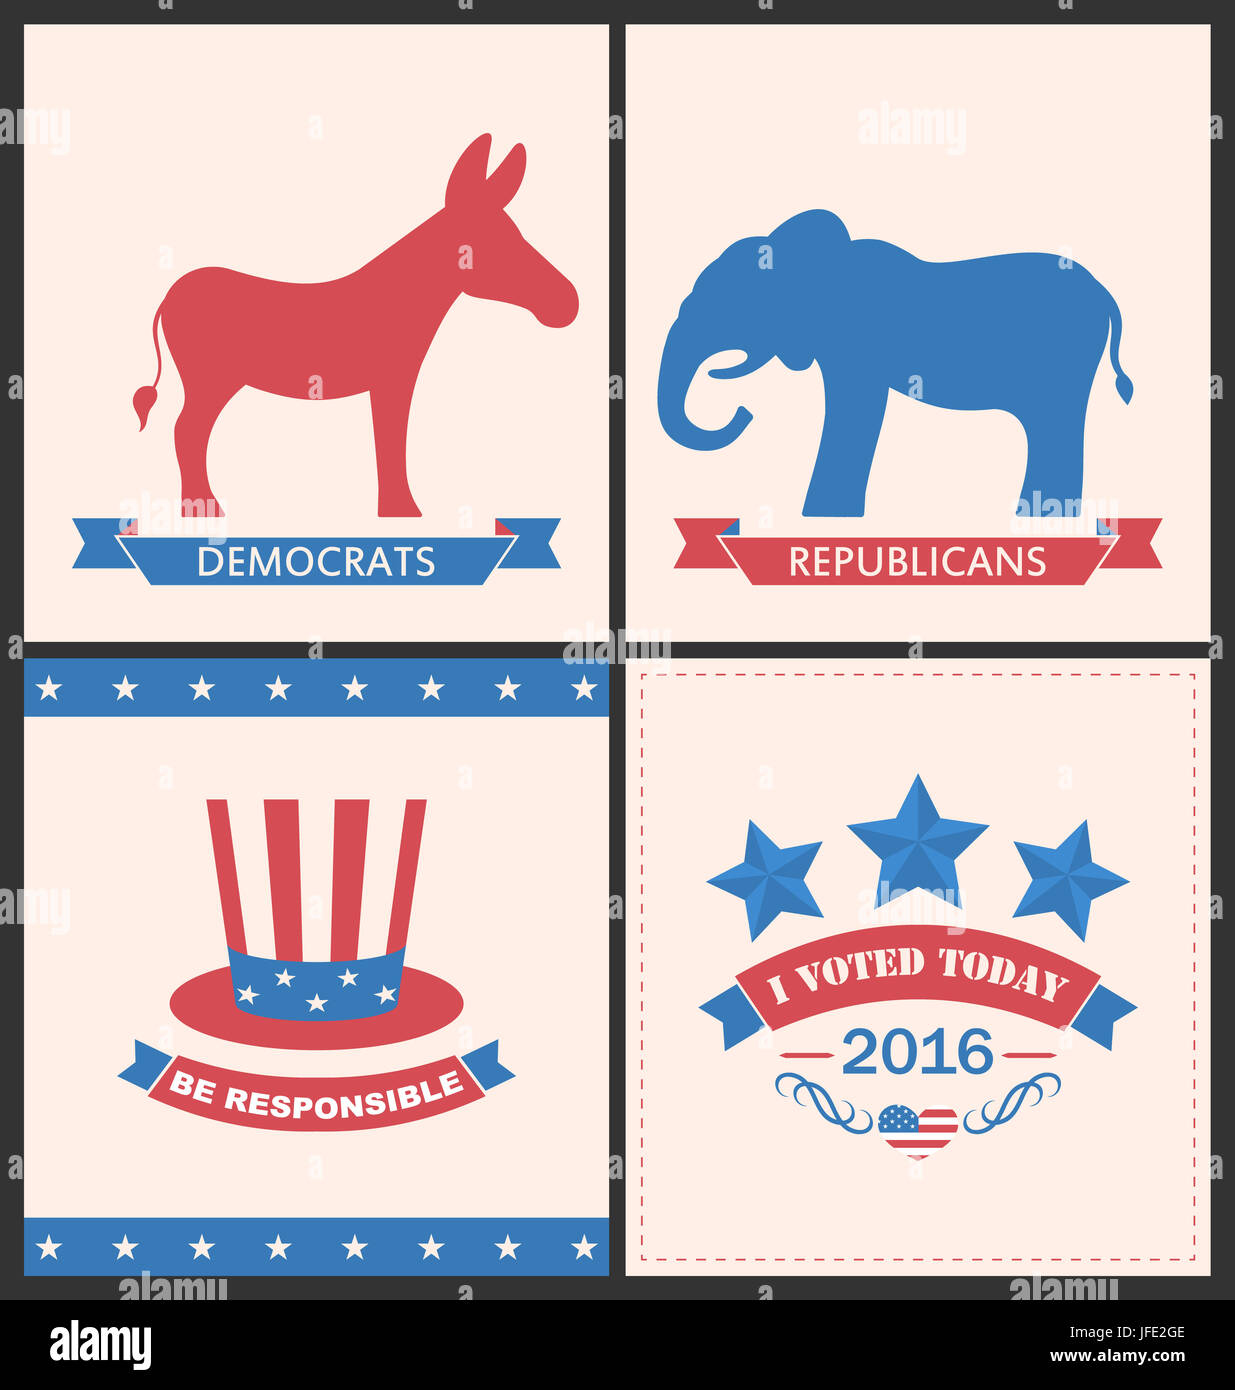 Illustration Retro Cards for Advertise of United States Political Parties. Vintage Flyers with Donkey and Elephant. Vote 2016 - Stock Photo